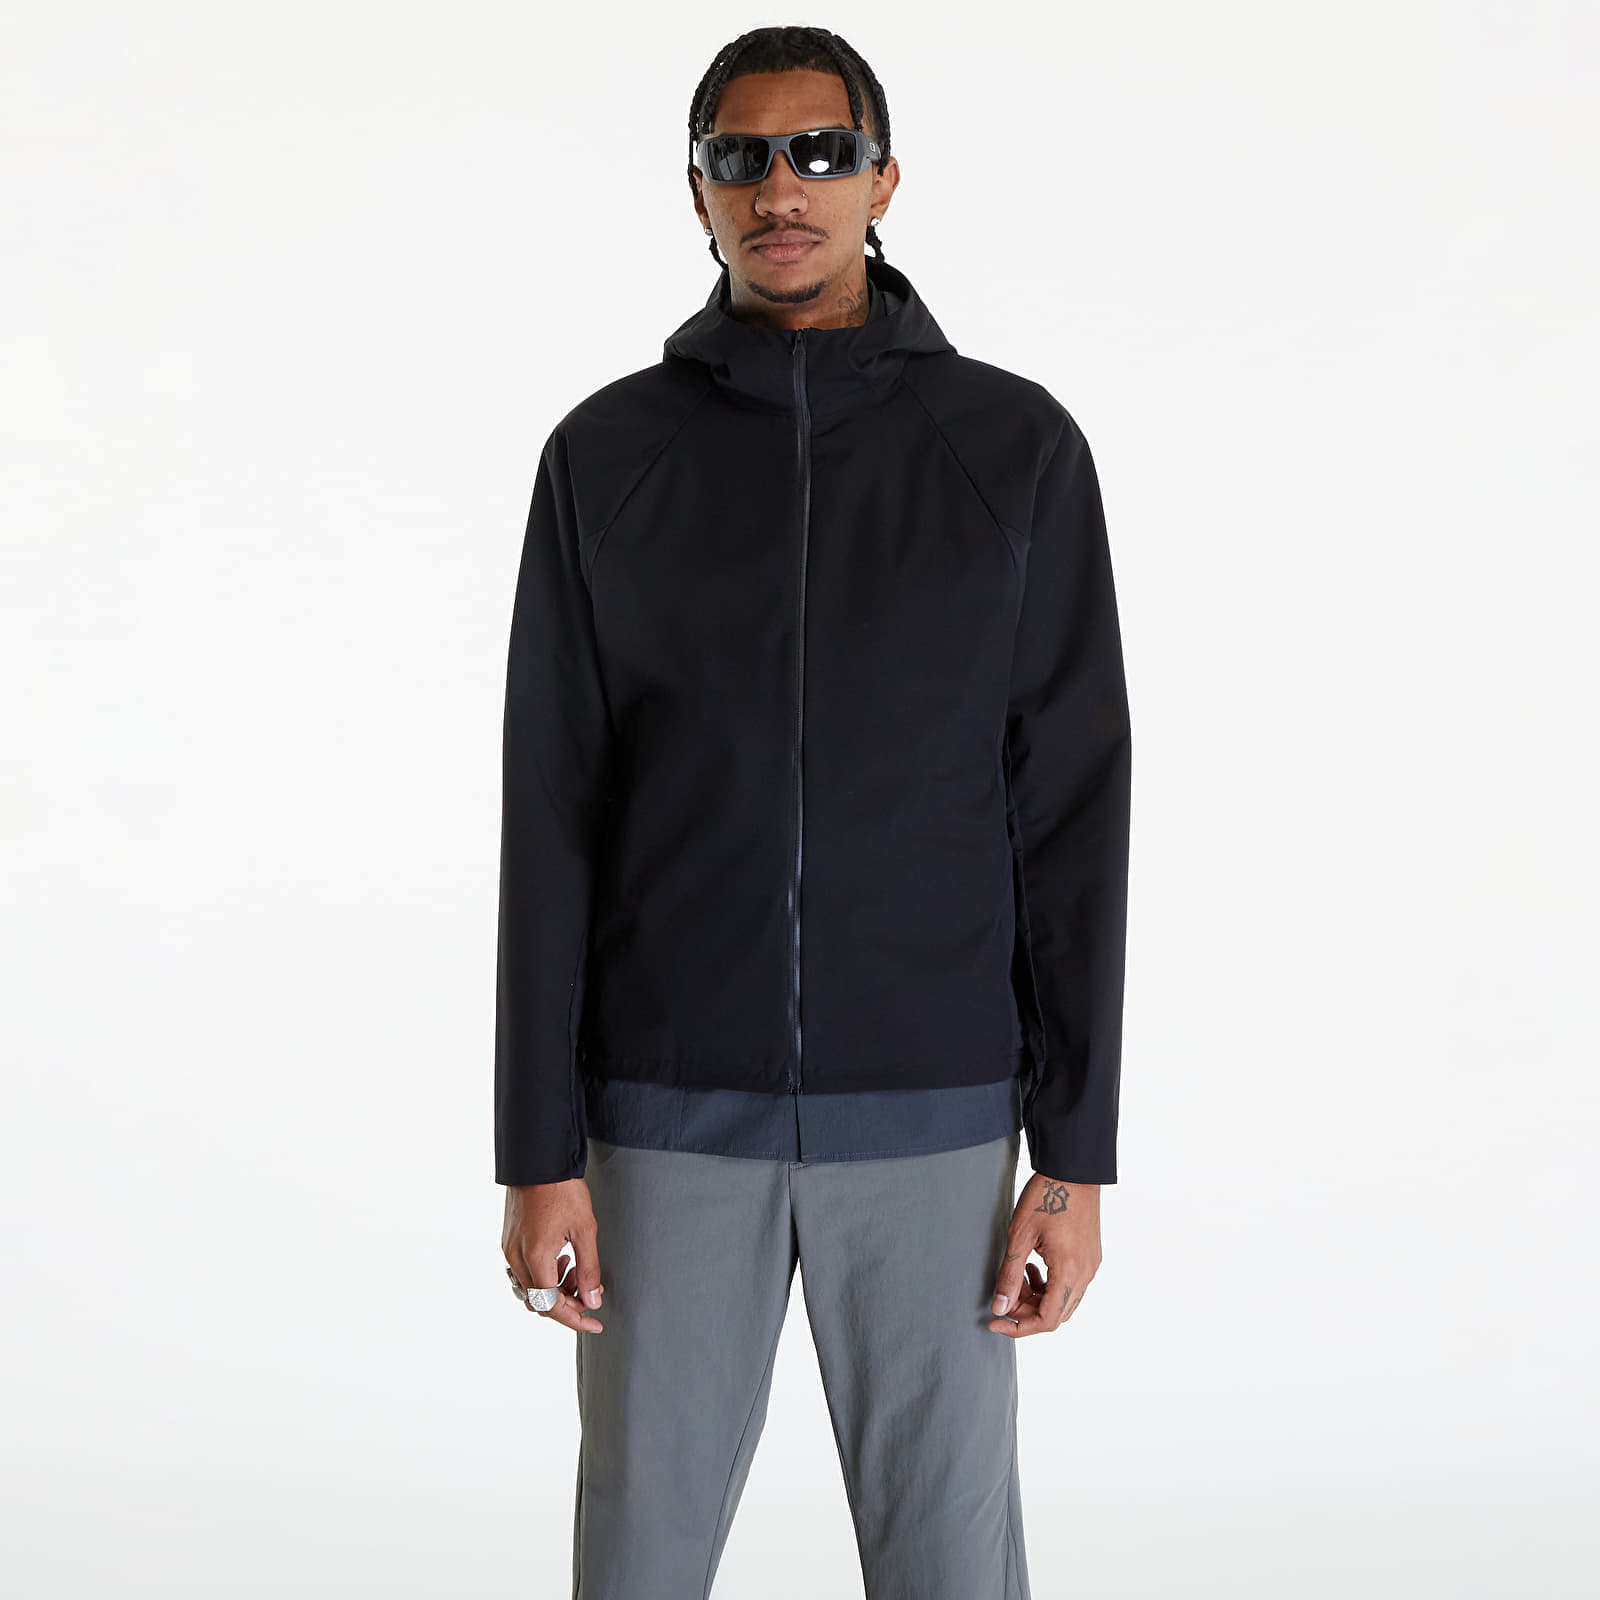 Якета Post Archive Faction (PAF) 6.0 Technical Jacket Right Black